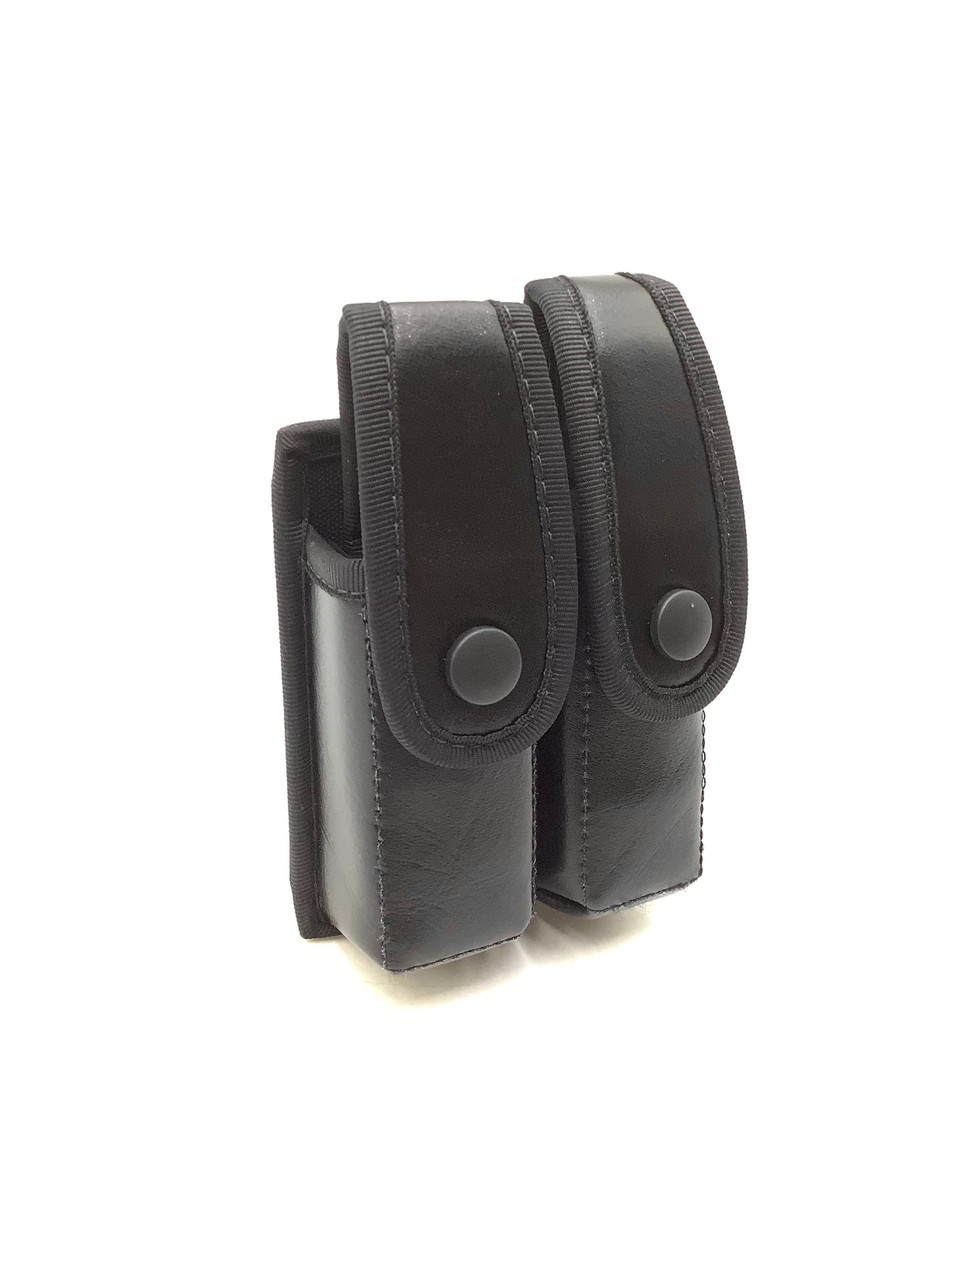 Tactical Design Double Mag Pouch for G17 Gen 5  9mm Magazines